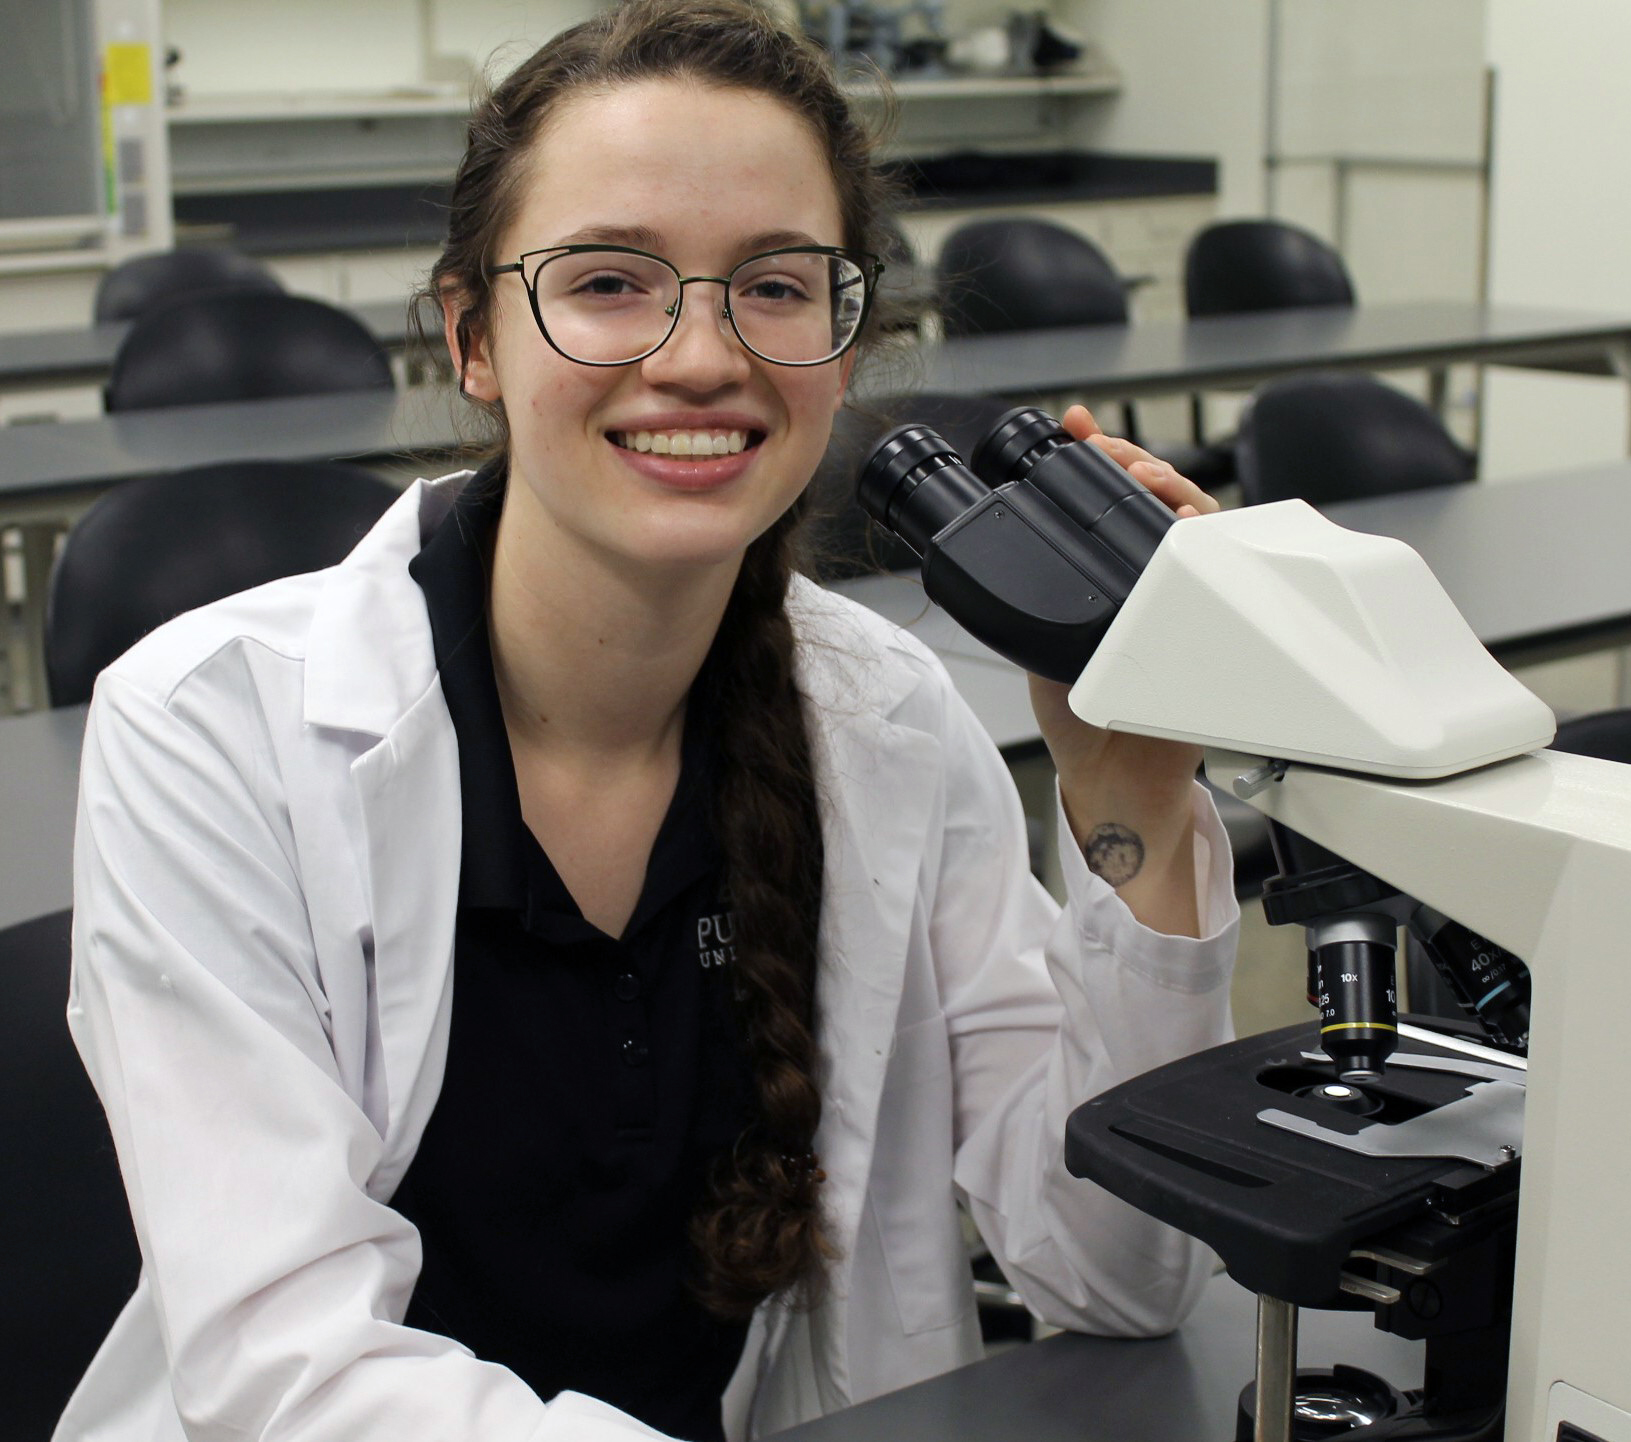 Emma Zaicow uses a microscope to look closely at bacteria.